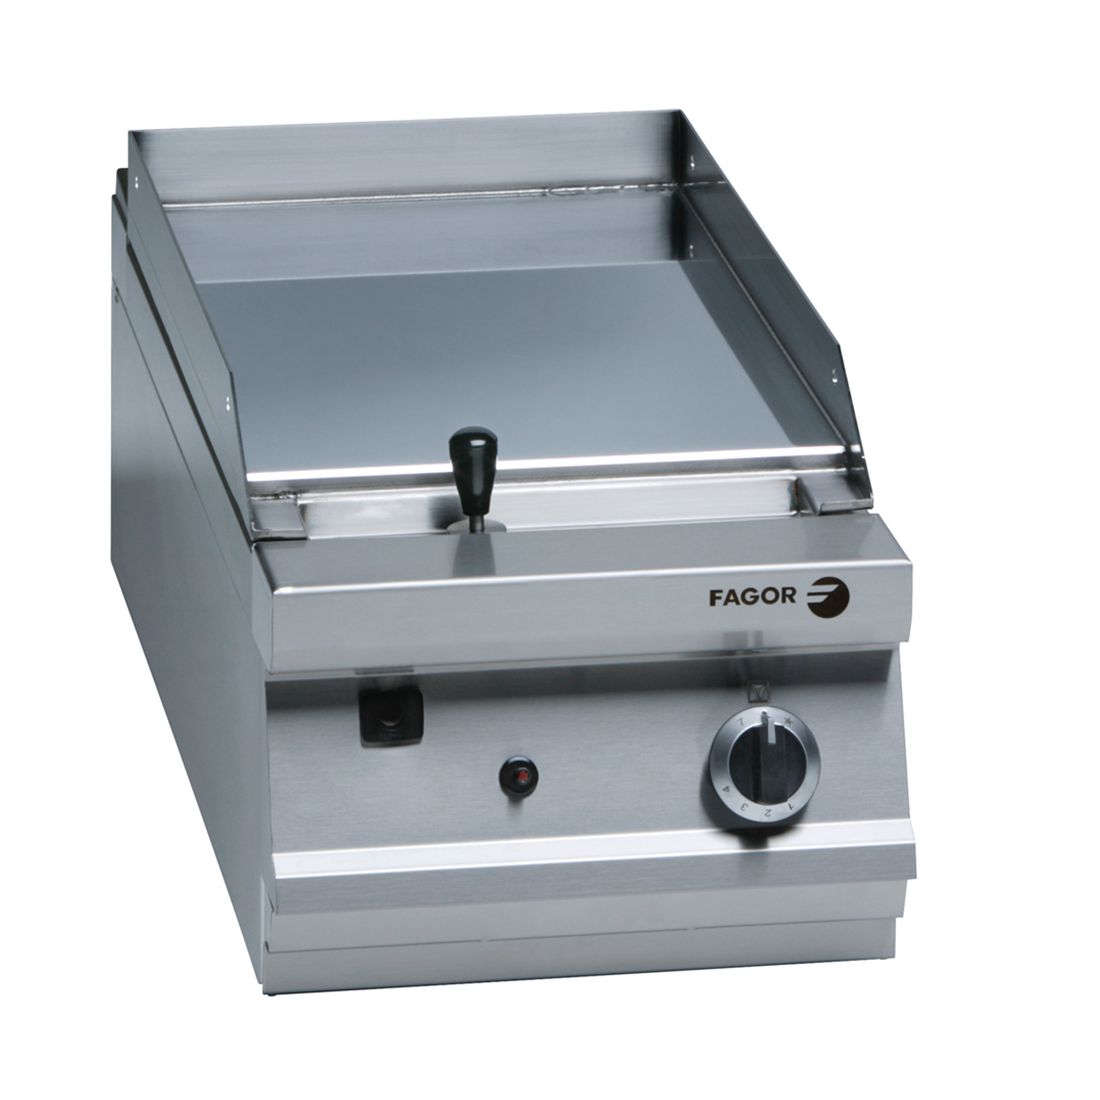 Fagor 900 series natural gas chrome 1 zone fry top FTG-C9-05L